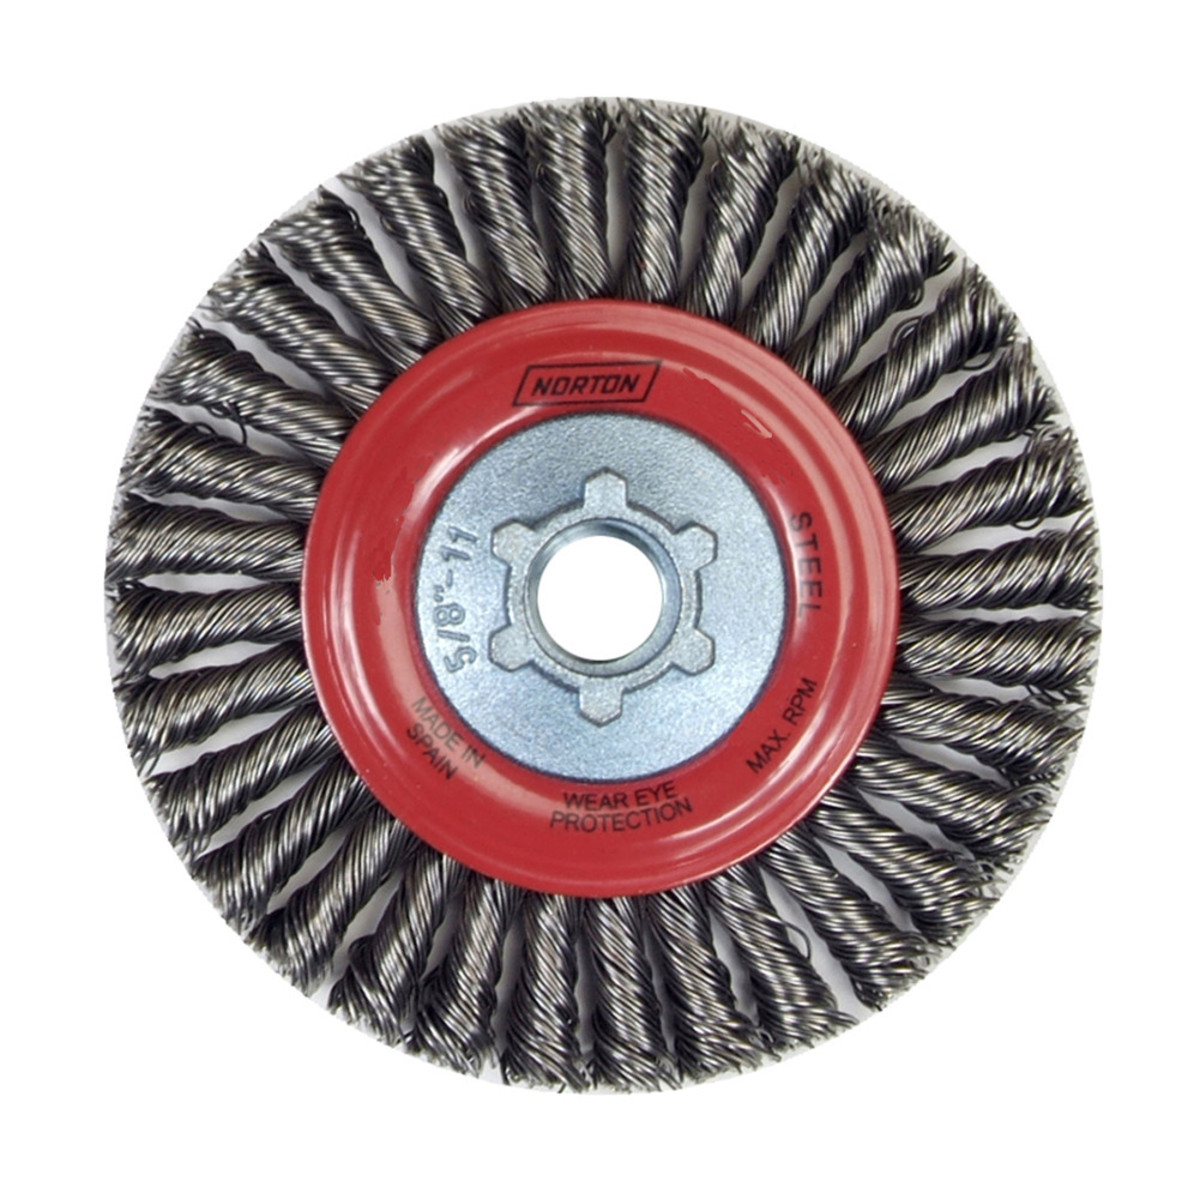 Norton Full Cable Twist Knot Wire Wheel Brushes 6 x .020 x 5/8-11